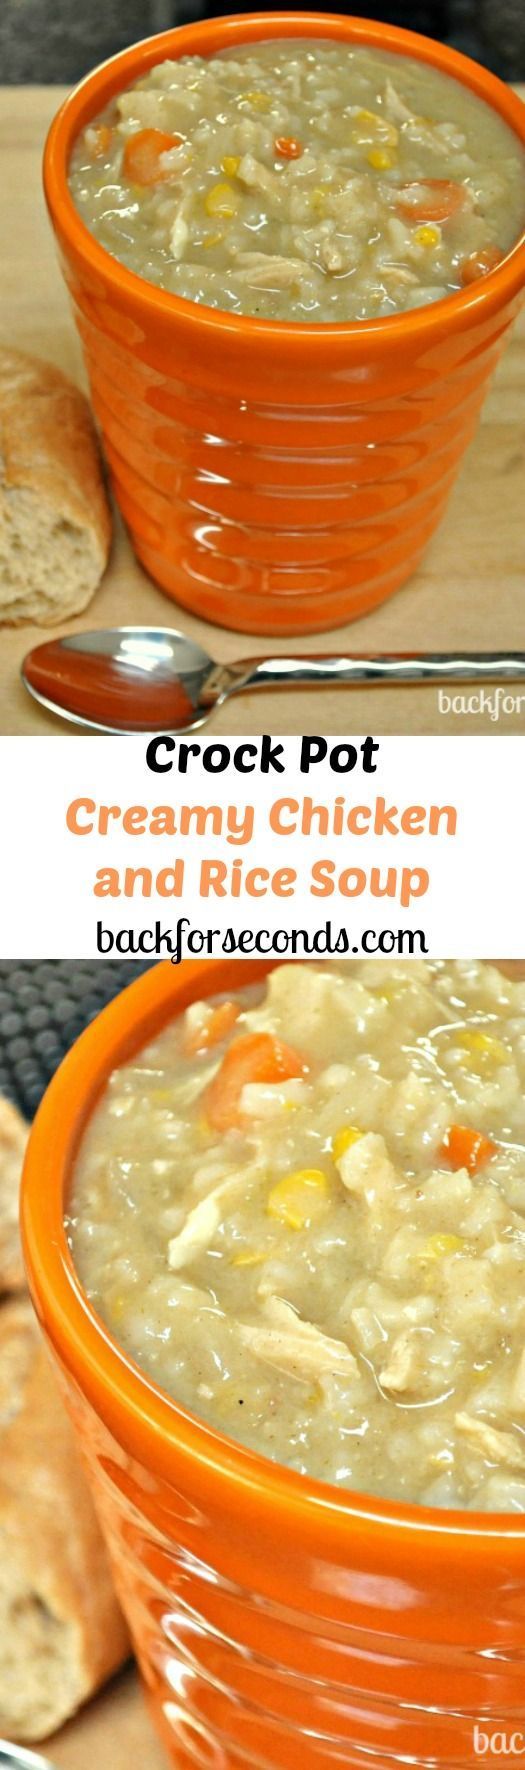 Creamy Chicken and Rice Soup Recipe made in the Crock Pot @Back For Seconds